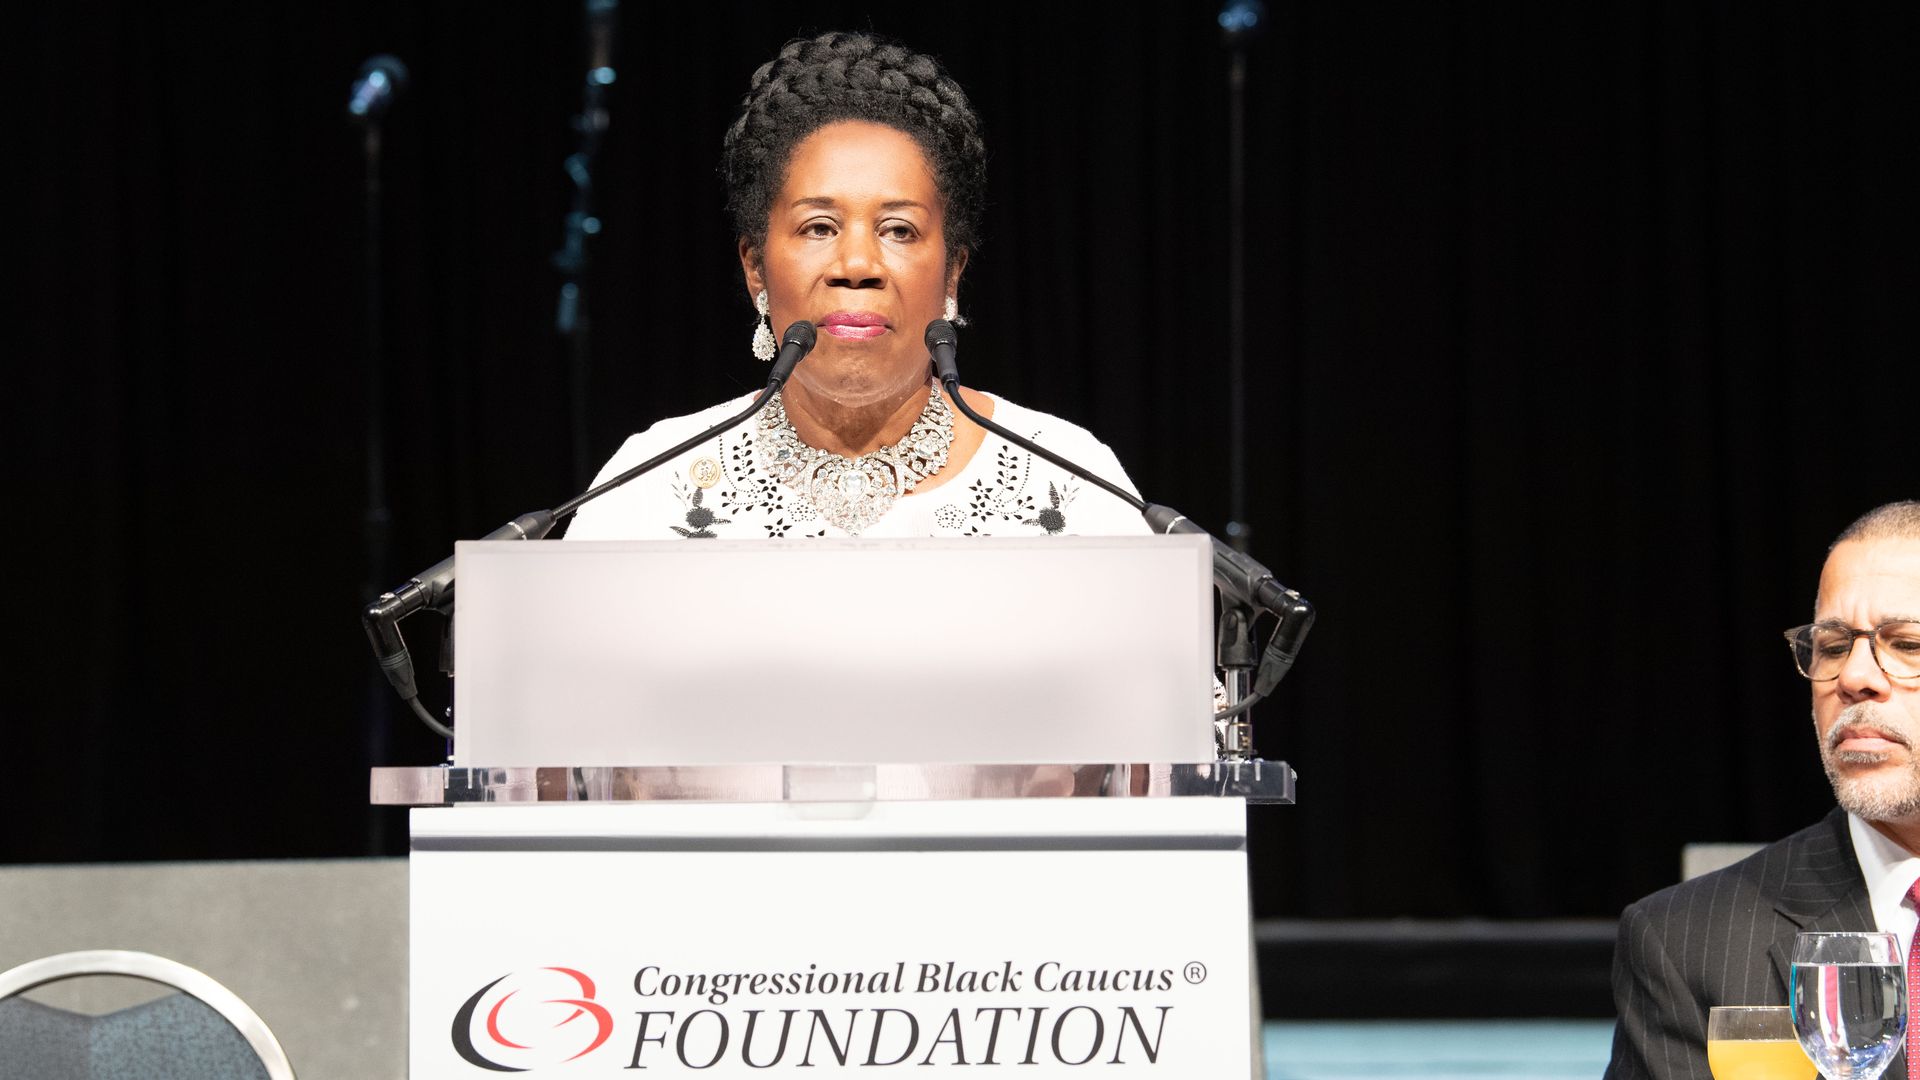 Sheila Jackson Lee at CBC Foundation podium in all white.